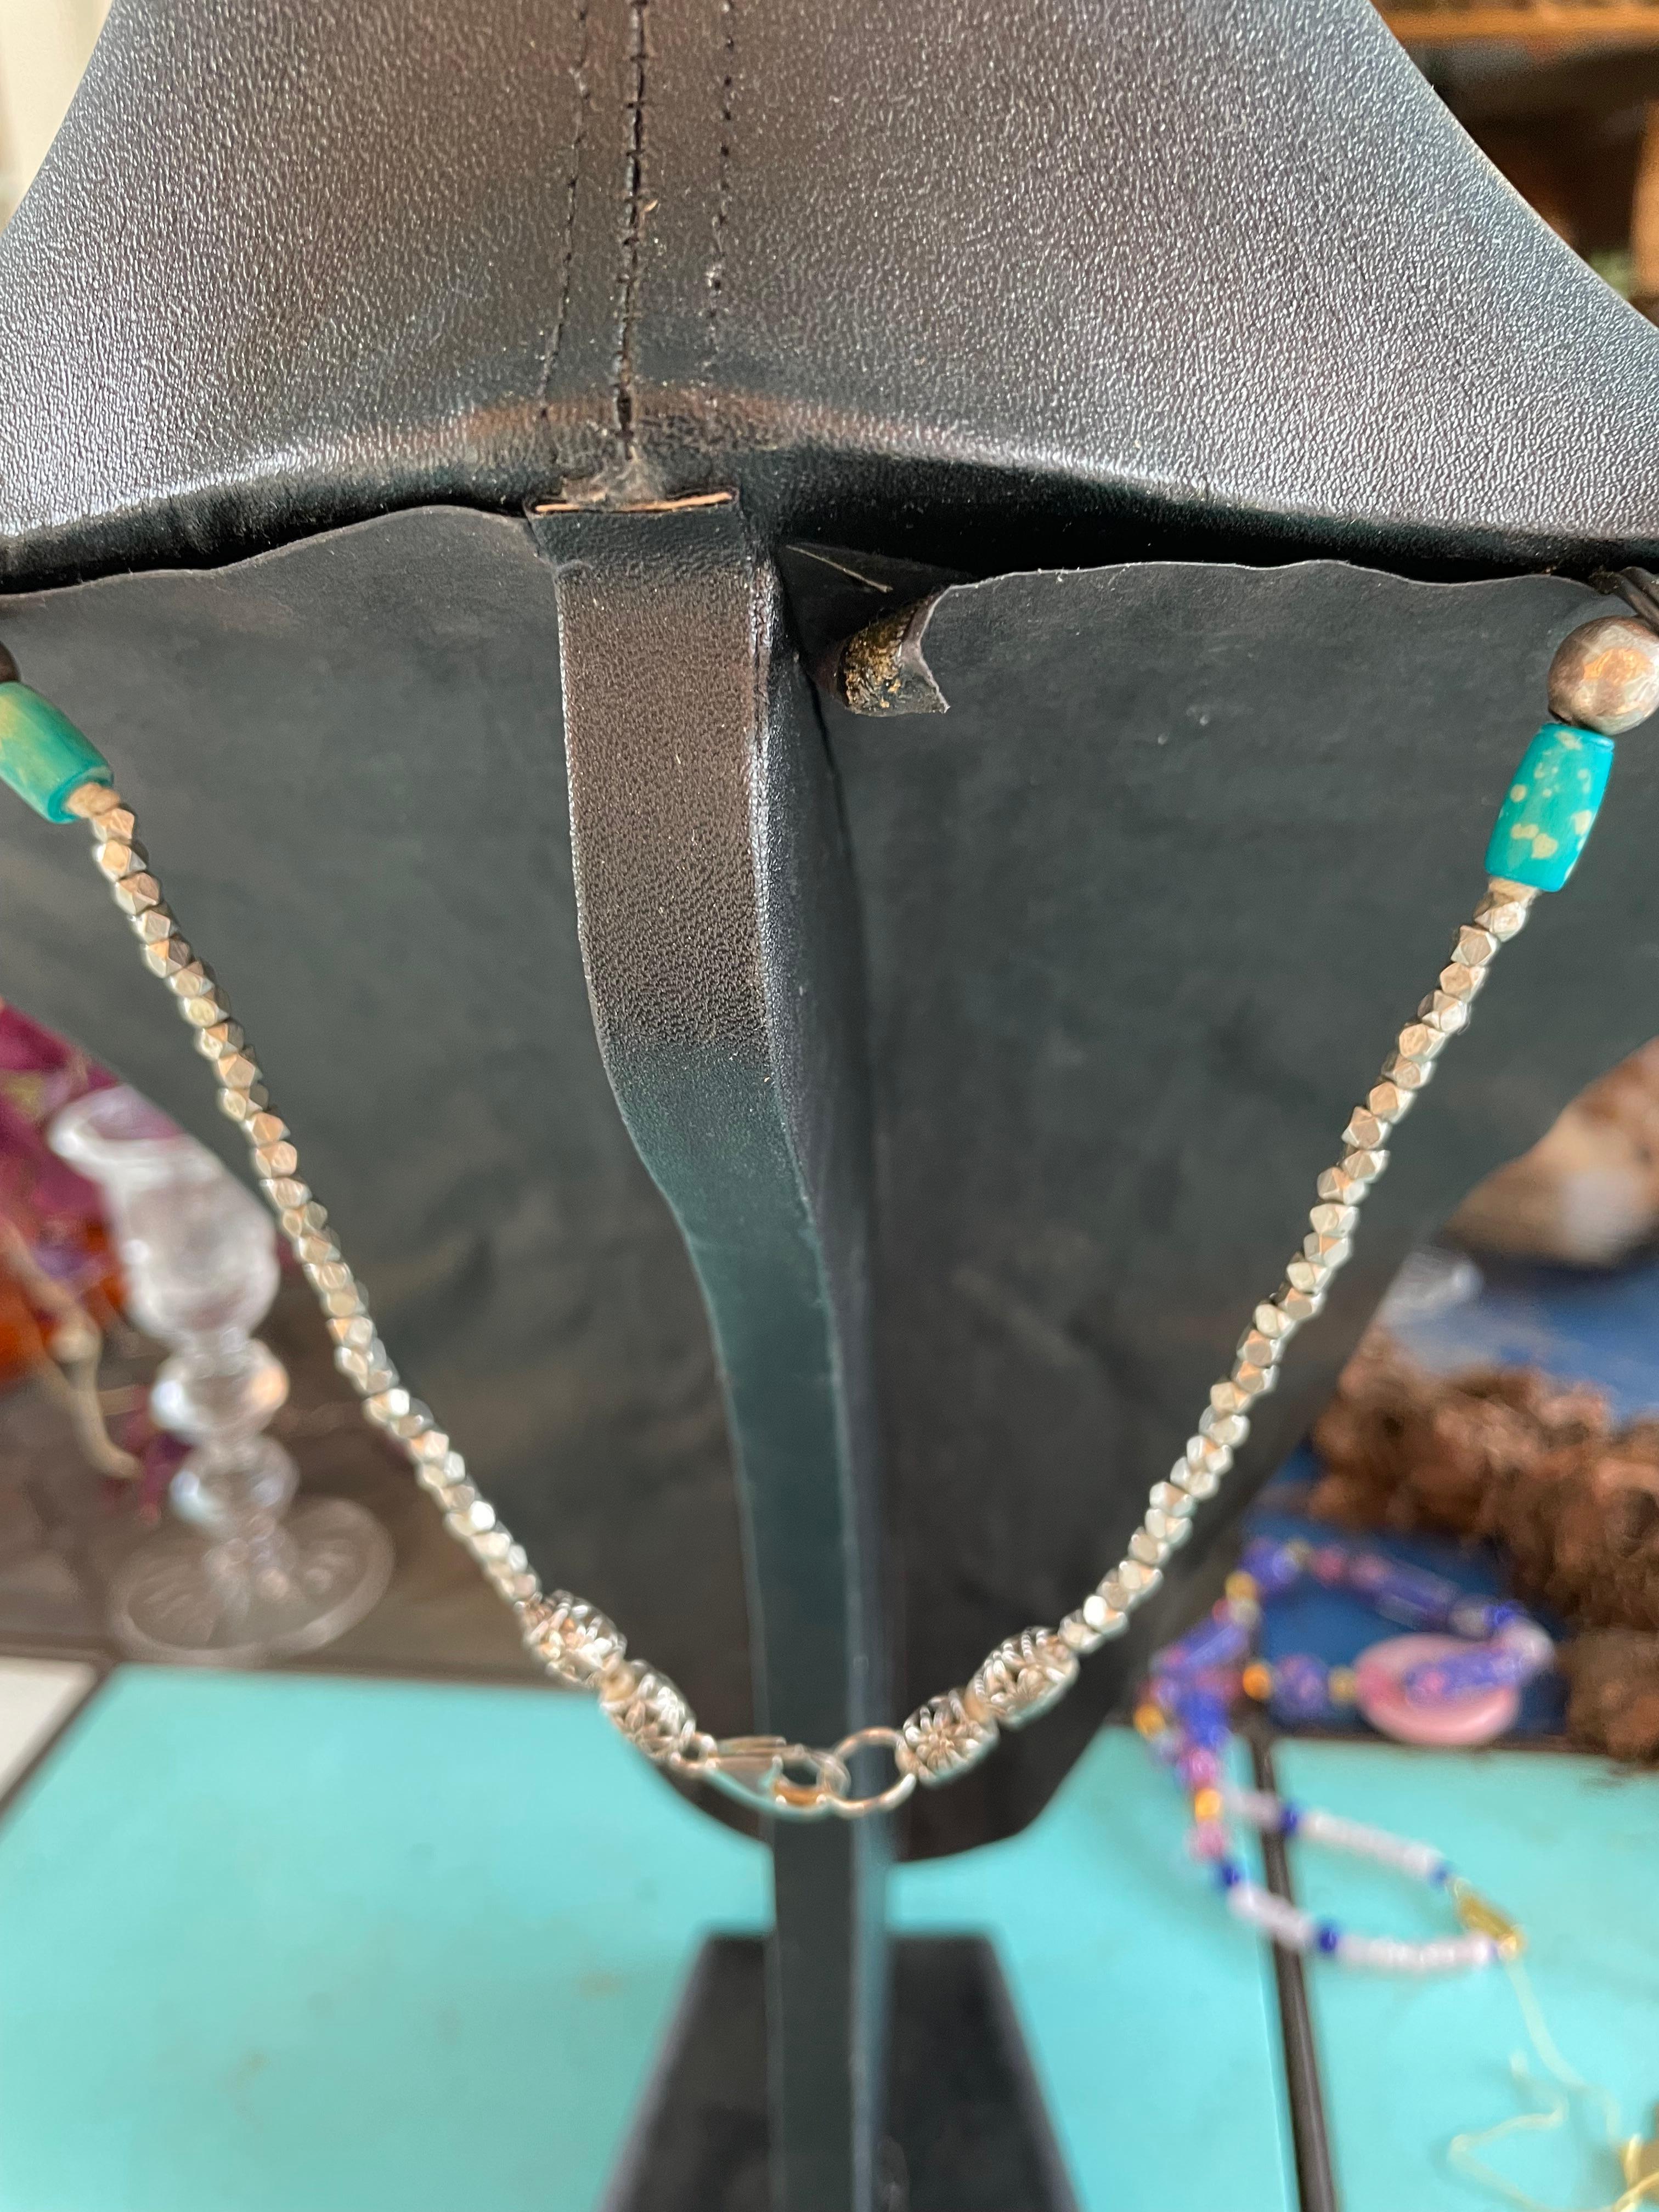 LB has on offer a vintage sterling Silver Navajo collar ornament necklace with vintage Ceramic  
Turquoise beads and sterling beads. This one of a kind, handmade, statement necklace  is dramatic and eye catching. I found the amazing vintage sterling